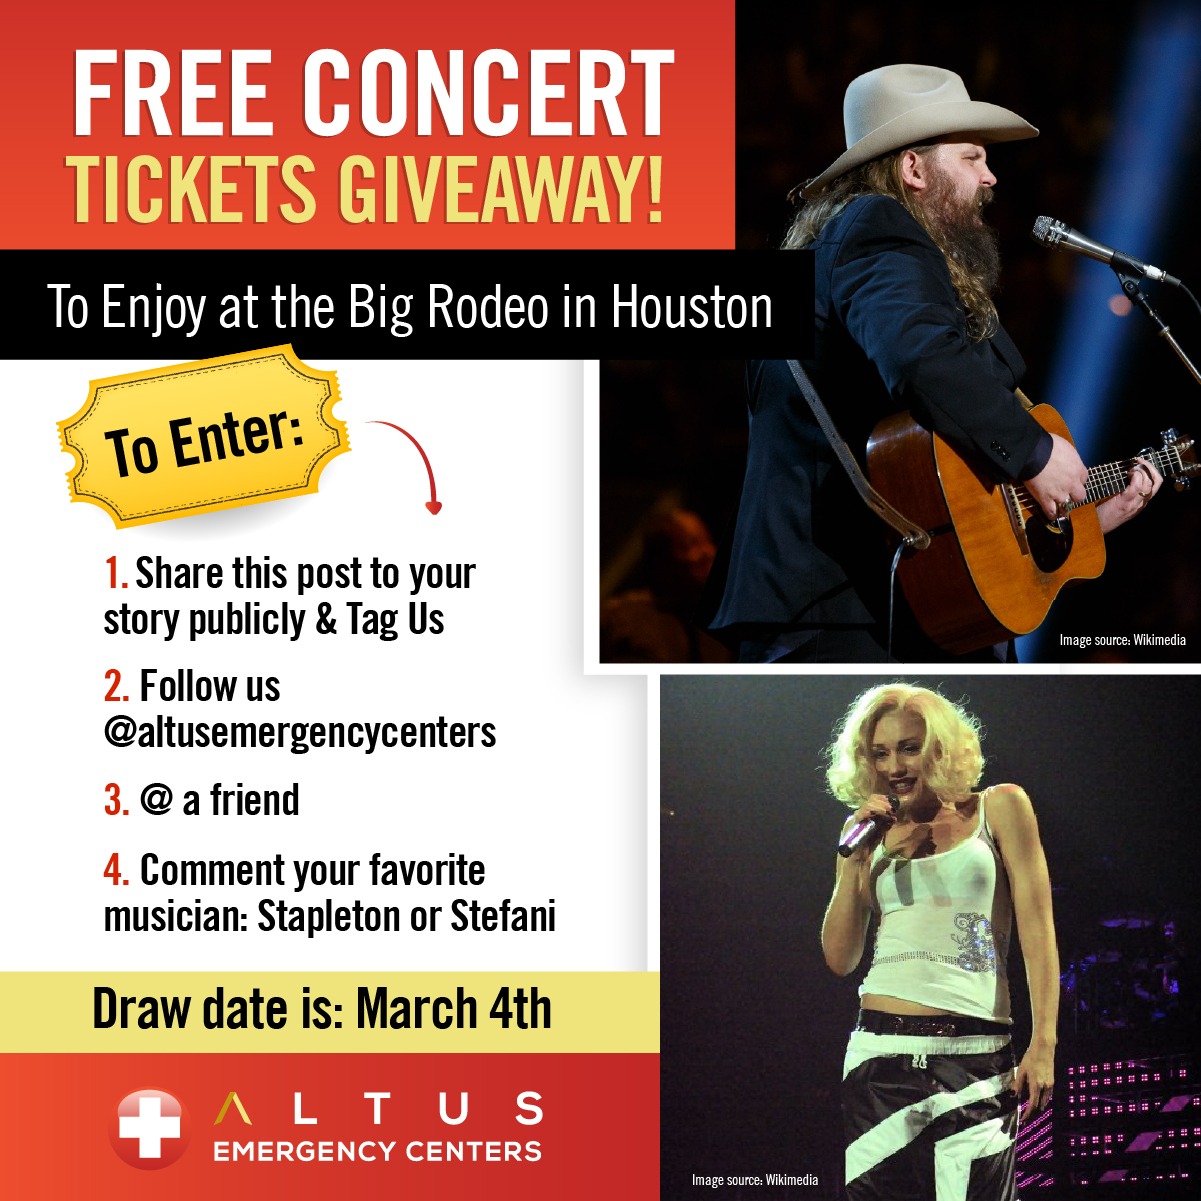 FREE Concert Tickets Announcement